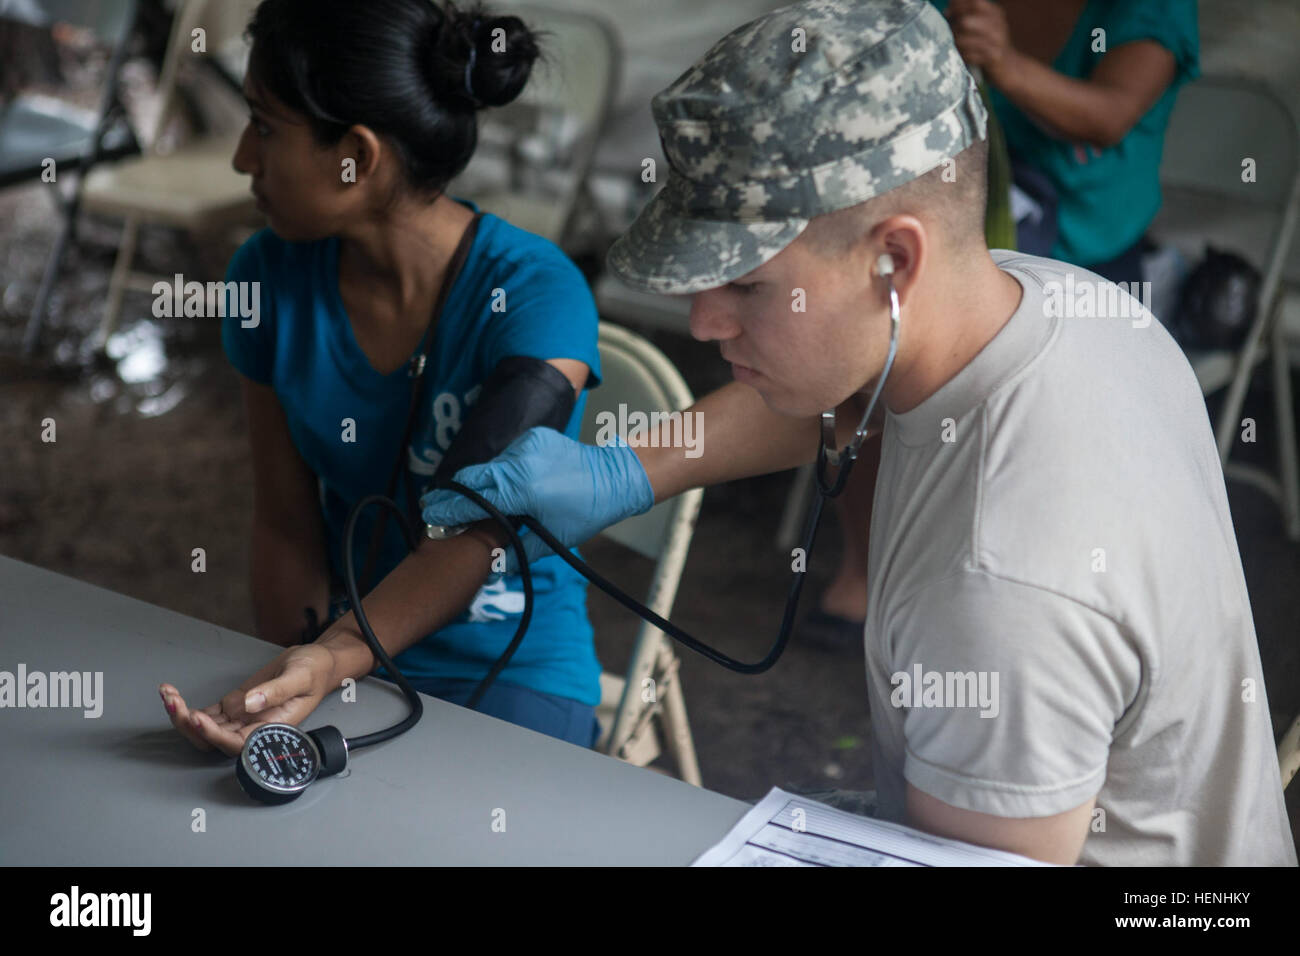 U.S. Army Spc. Steven Dixon, 349th Combat Support Hospital, conducts a medical exam at a Medical Readiness Training Exercise during Beyond the Horizon on June 2, 2014 in Rio Grande, Guatemala.  Beyond the Horizon is an annual exercise that embraces the partnership between the United States and Guatemala, to provide focused humanitarian assistance through various medical, dental, and civic action programs. (U.S. Army photo by Cpl. Michael Spandau/Released) Beyond The Horizon 2014, Guatemala 140602-A-TX665-005 Stock Photo